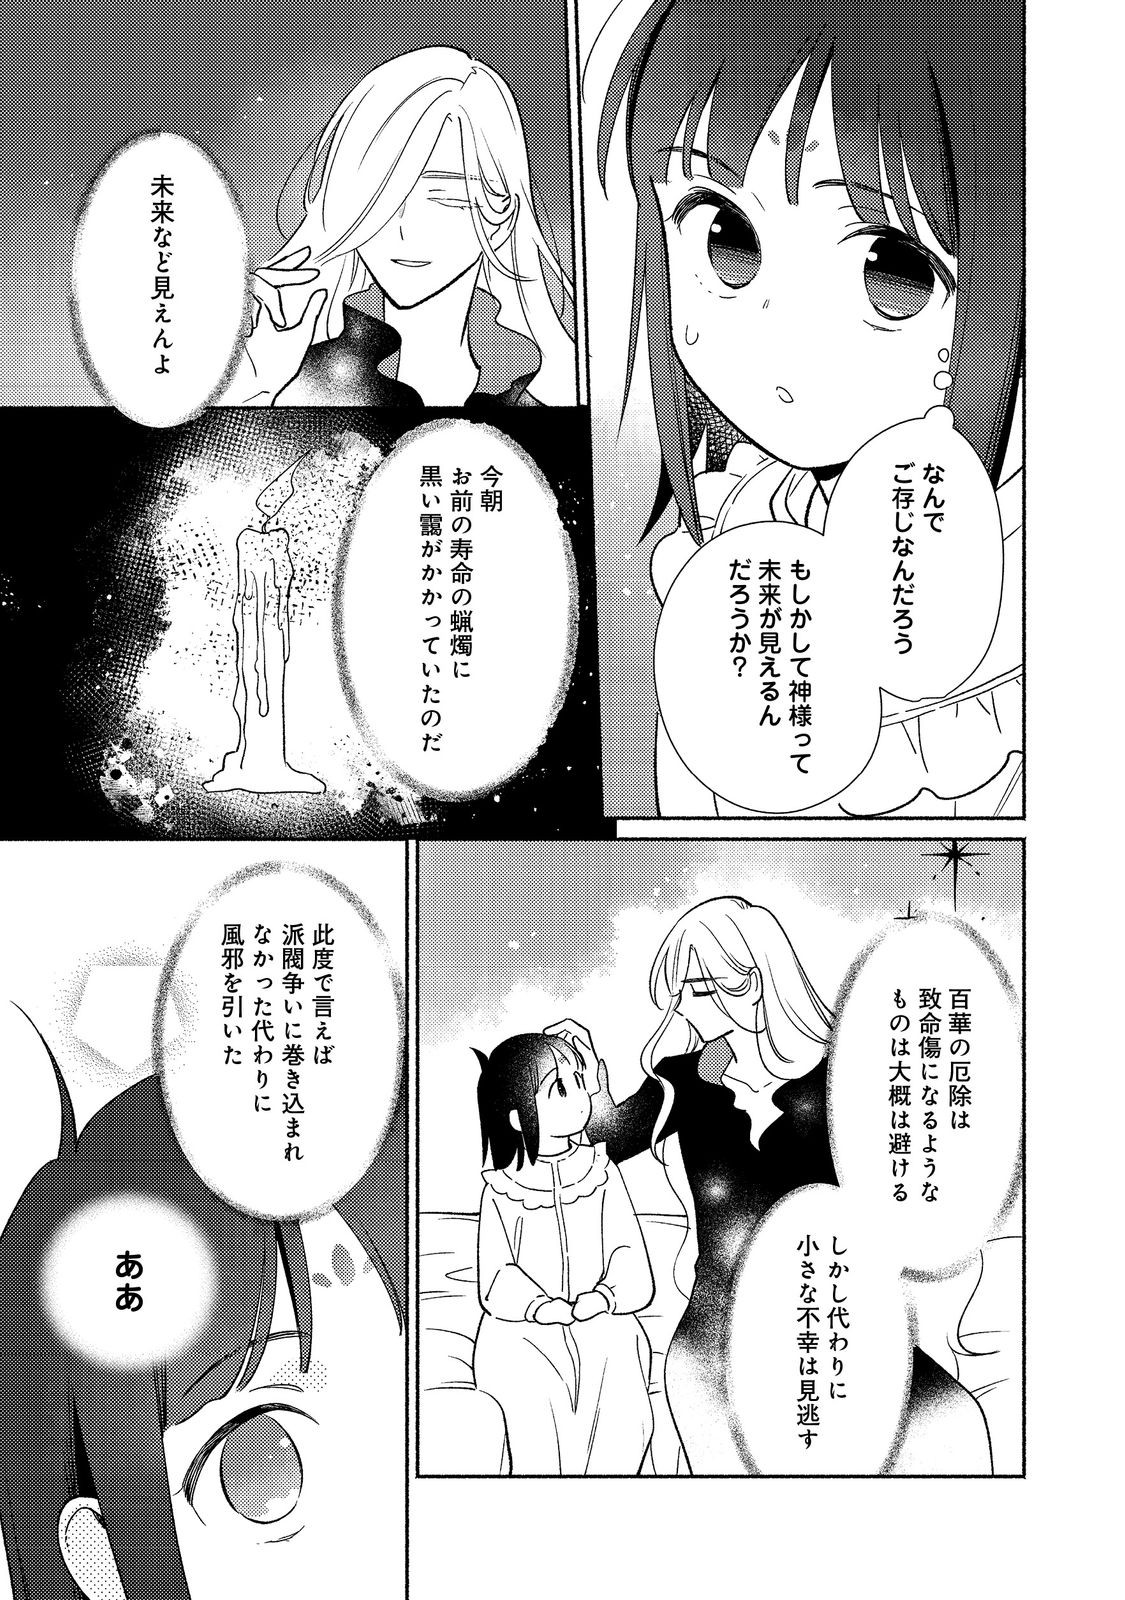 I’m the White Pig Nobleman 第23.2話 - Page 2